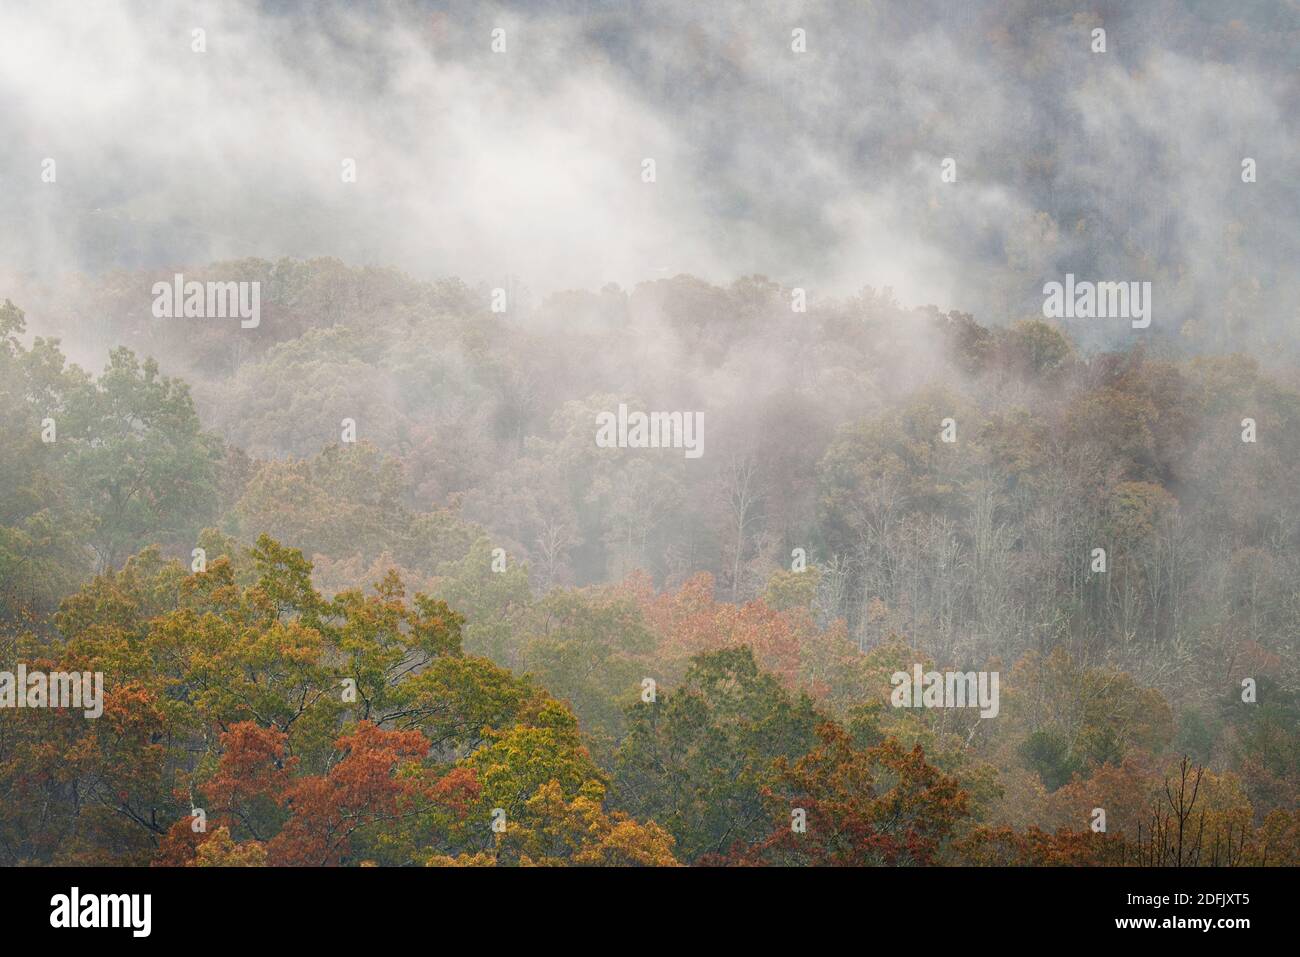 Misty autumn morning in the Cade’s Cove section of Great Smoky Mountains National Park, TN Stock Photo